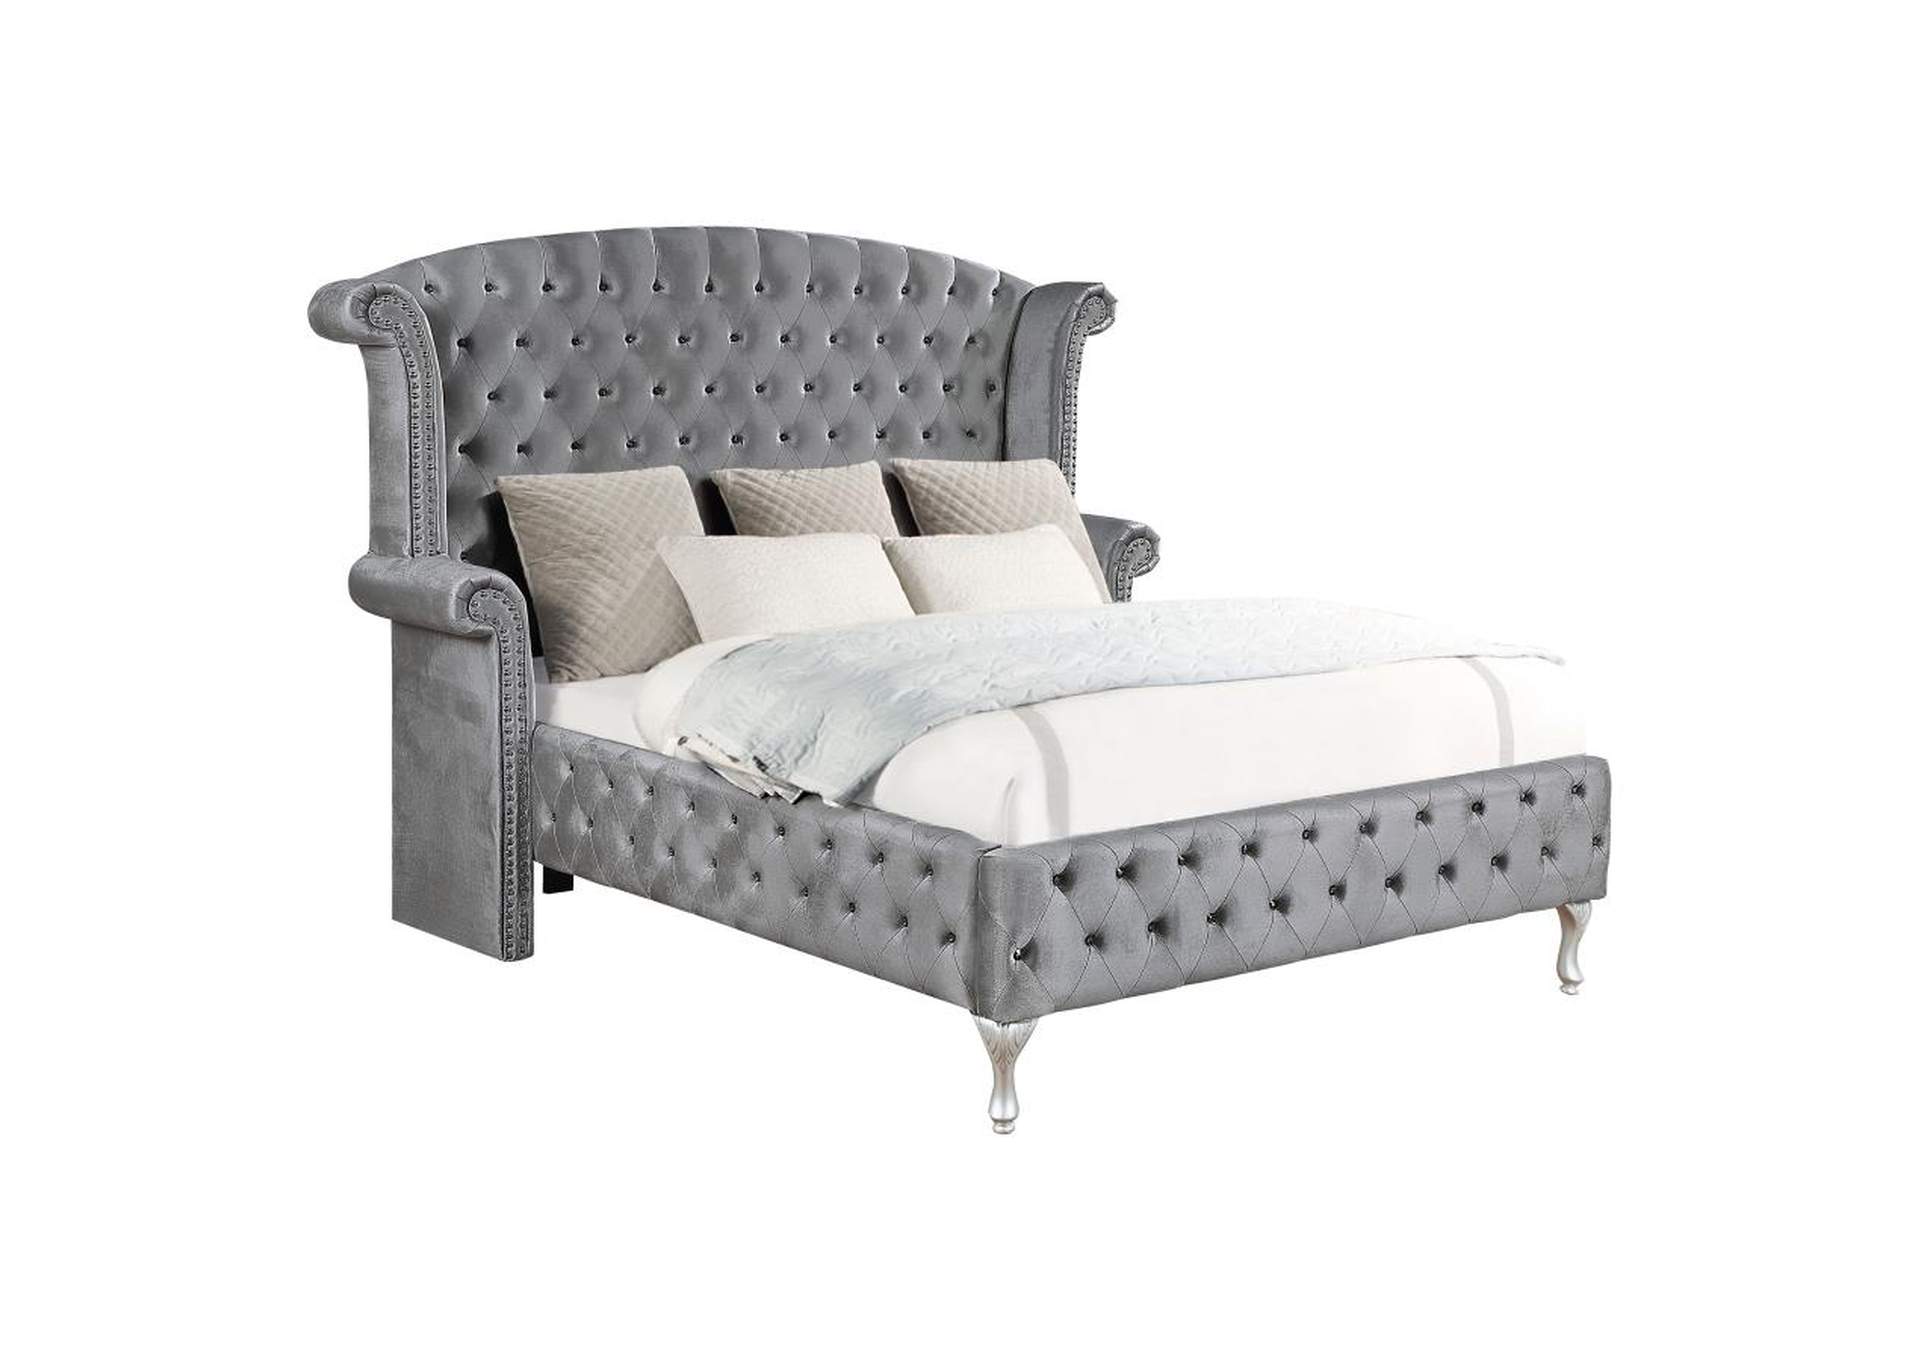 Deanna Queen Tufted Upholstered Bed Grey,Coaster Furniture